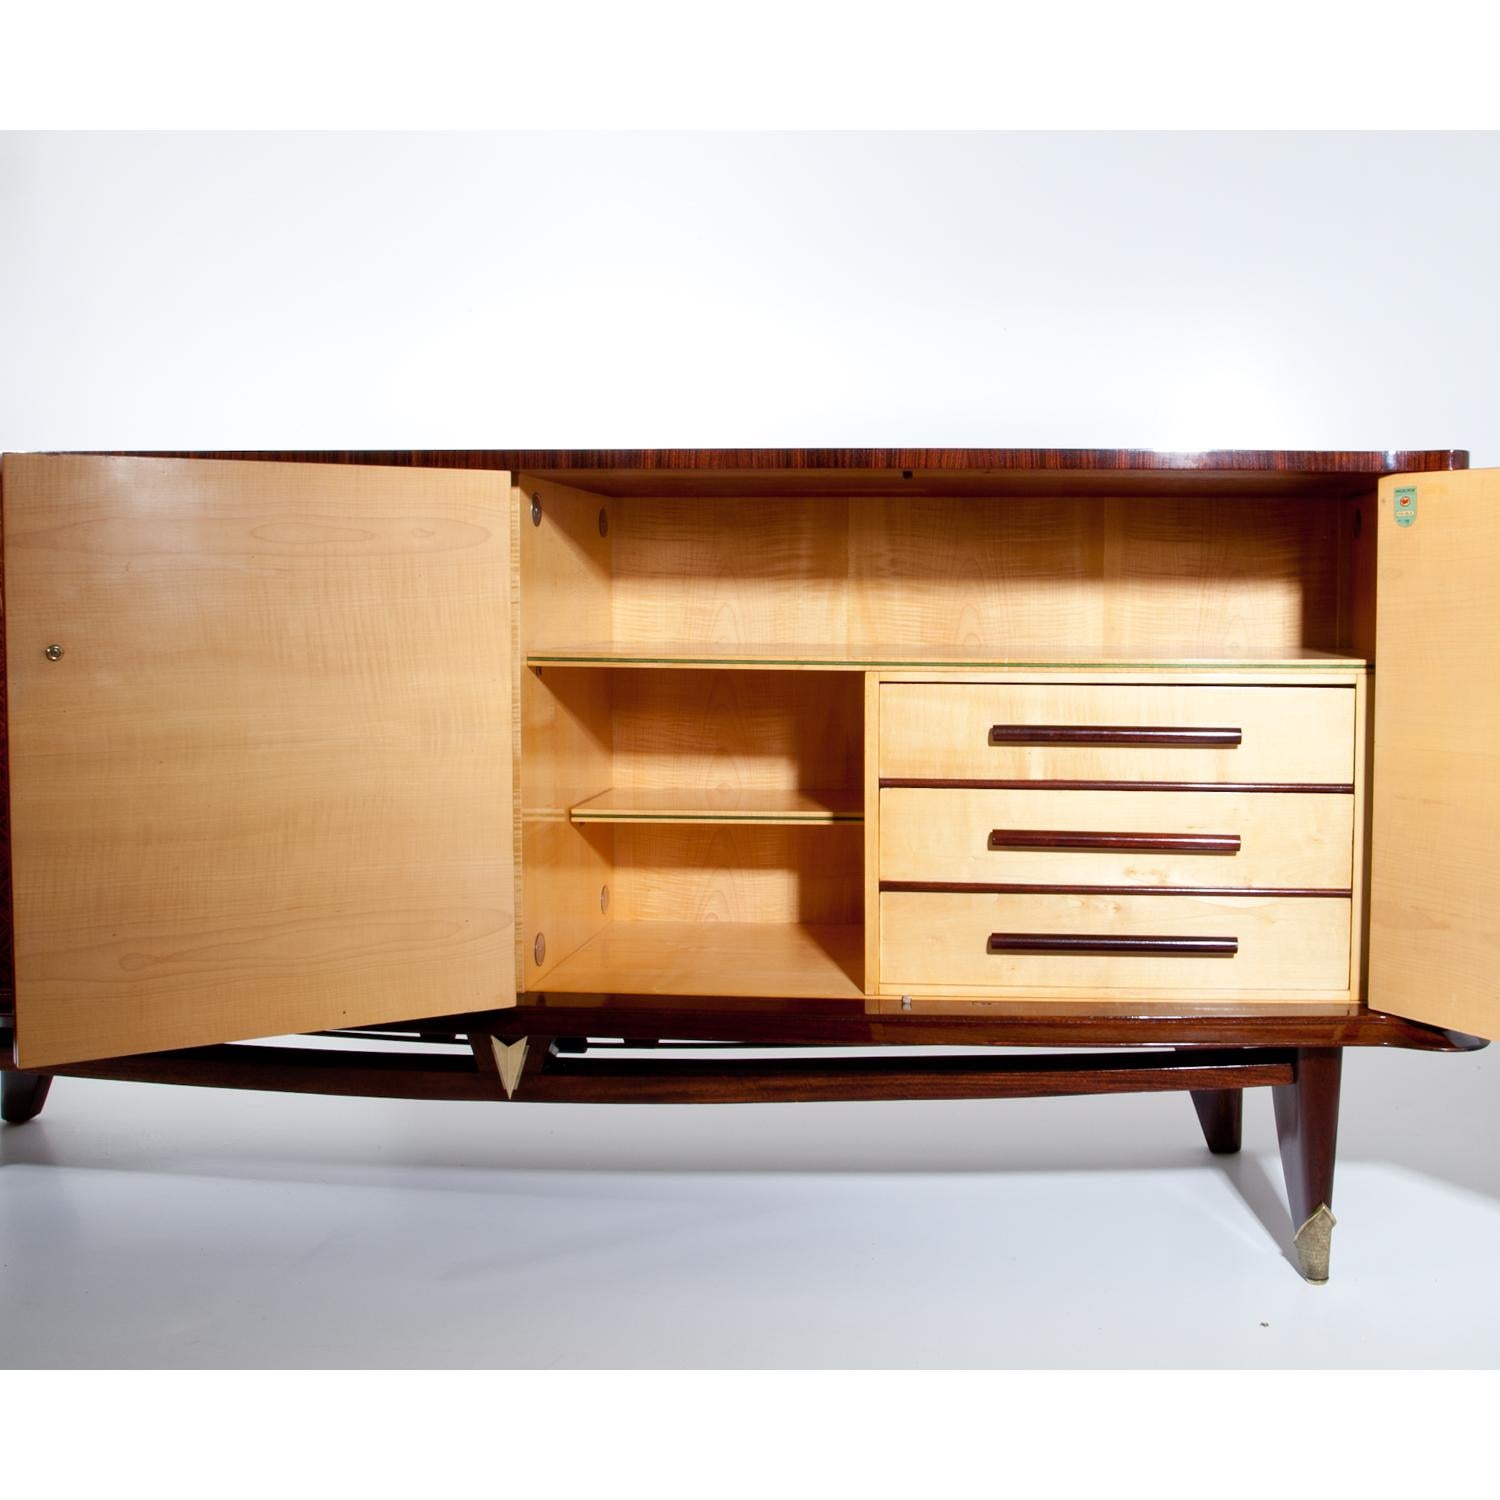 Mid-20th Century Sideboard by Ameublement NF, France 1960s